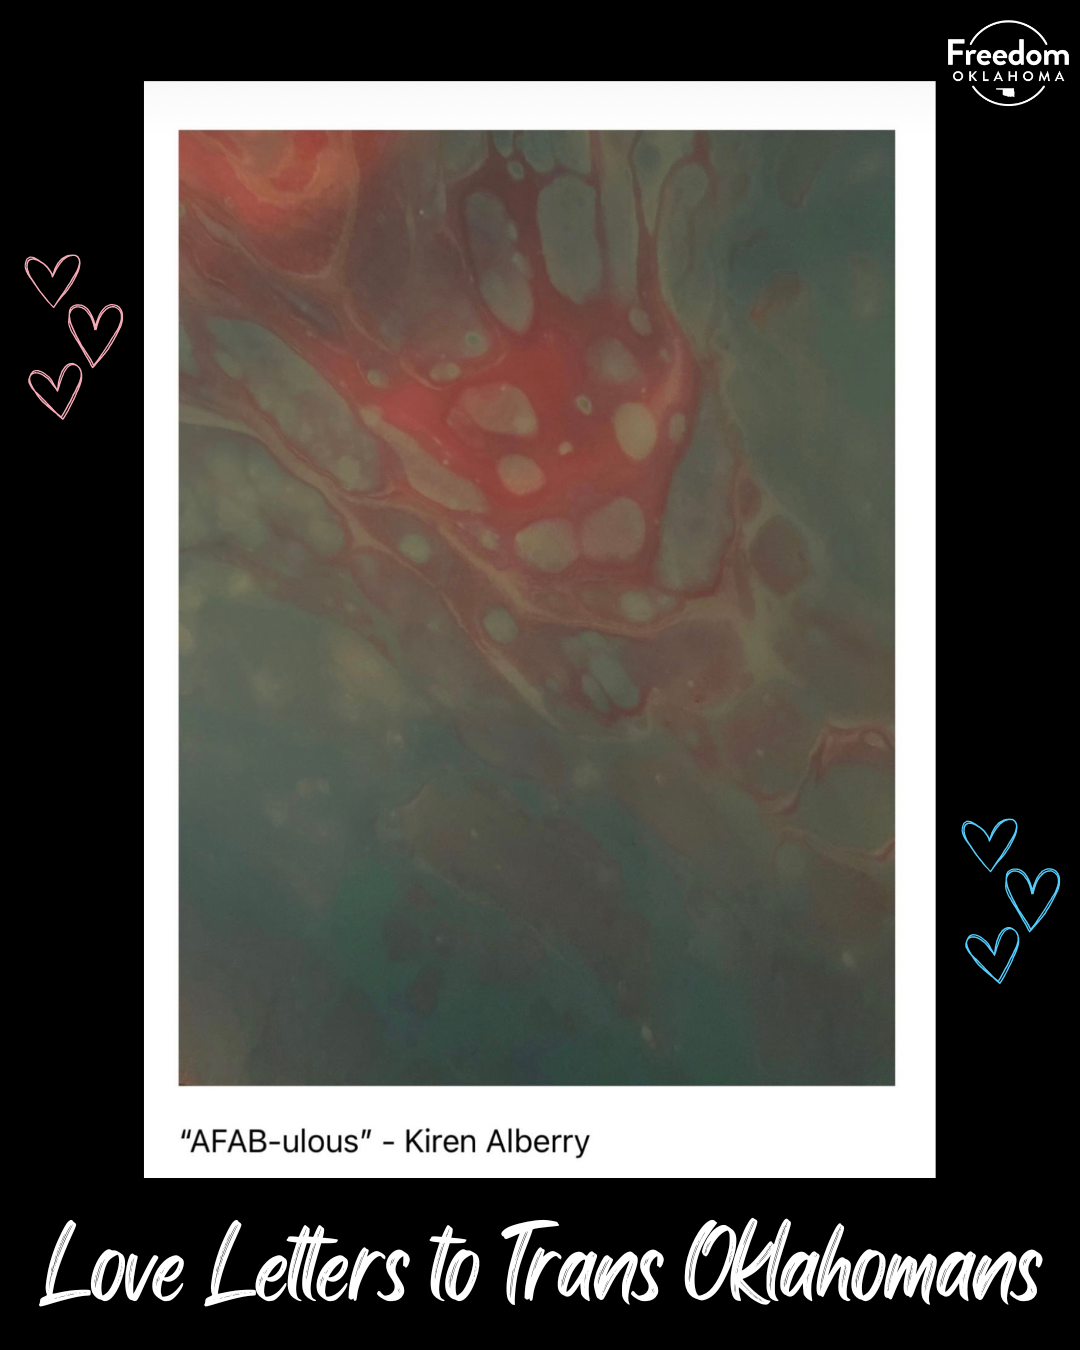  Black background with "Love Letters to Trans Oklahomans" at the bottom and in the center is the piece titled "AFAB-ulous" by Kiren Alberry. Abstract painting that looks bubbly with a dark pink/red blotch as the main focus, surrounded by blue. 